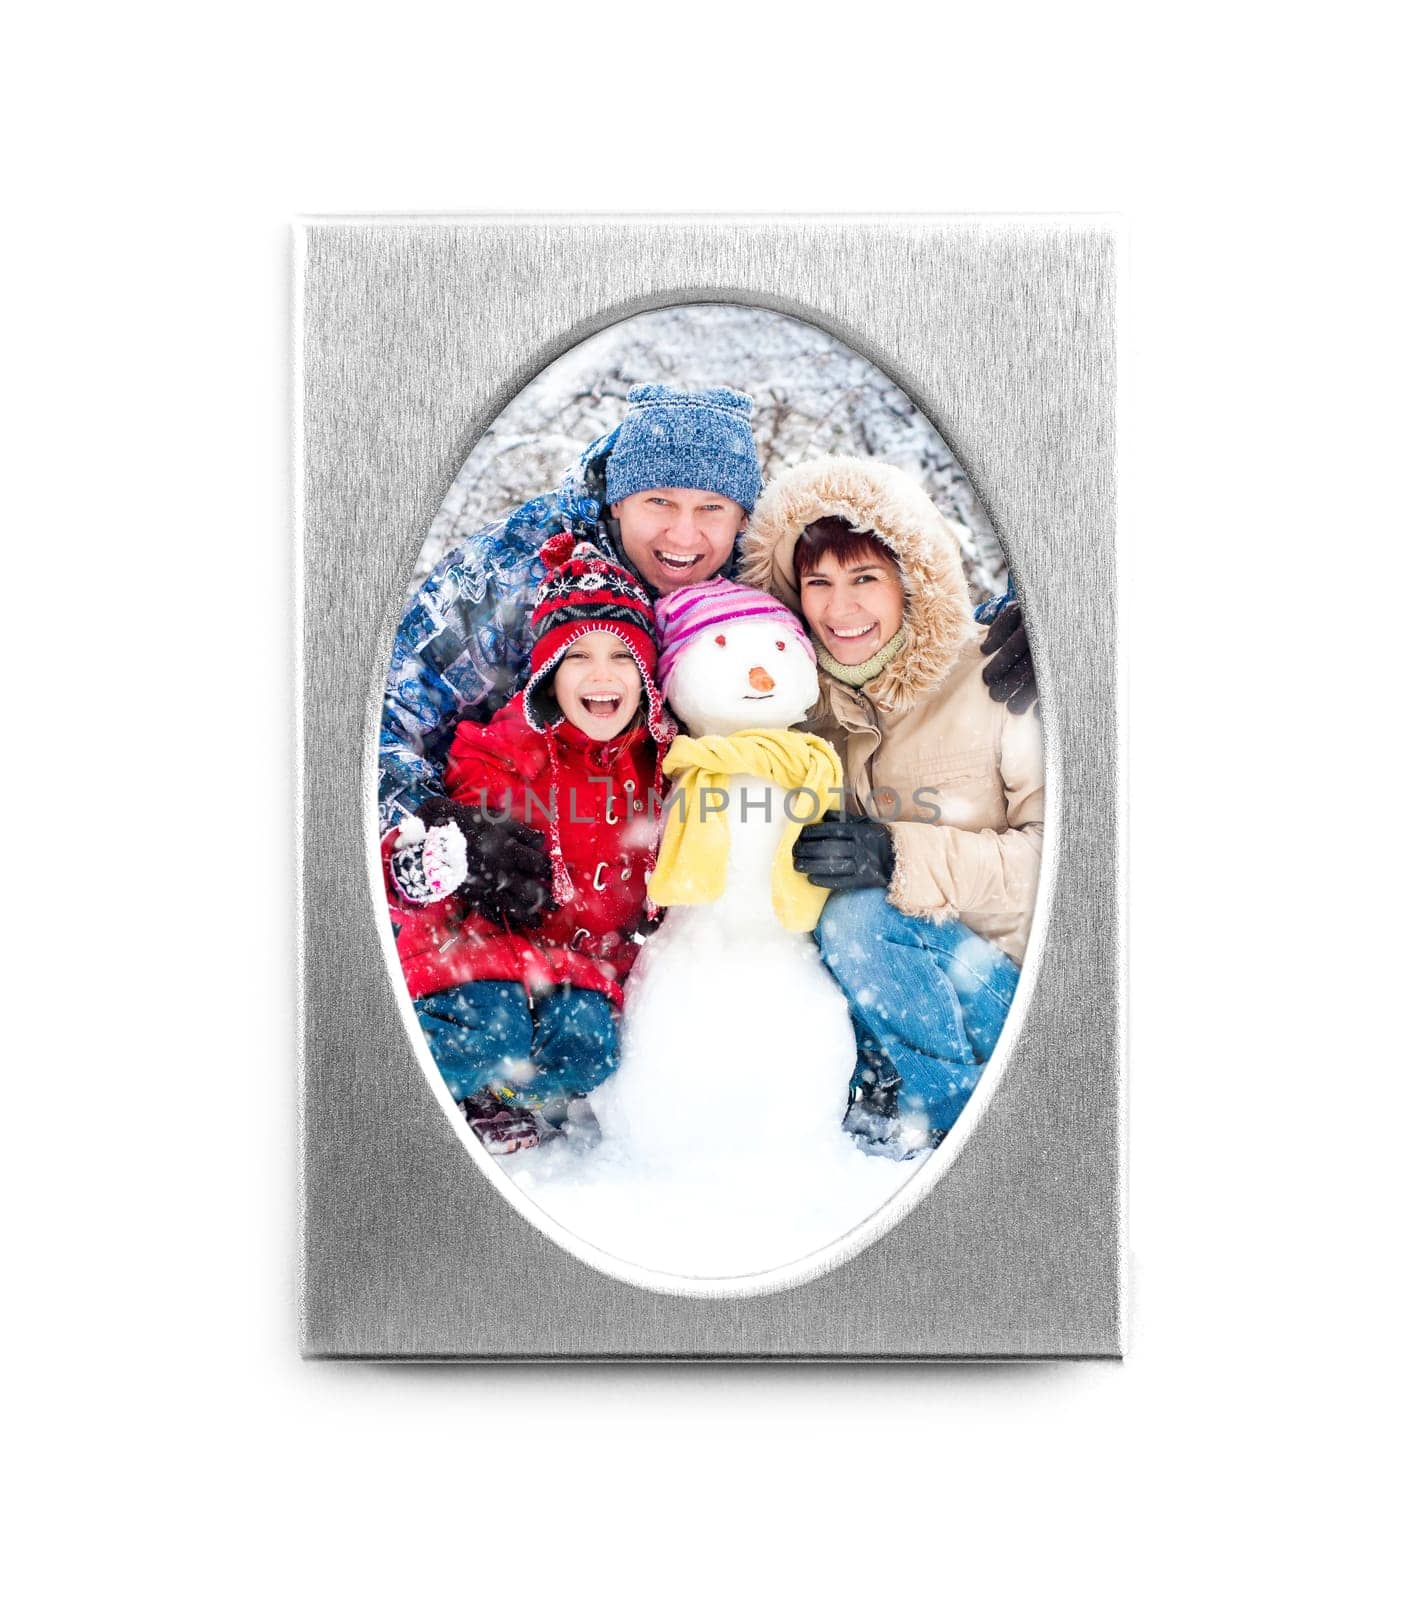 Silver oval frame with happy family photo isolated on white background